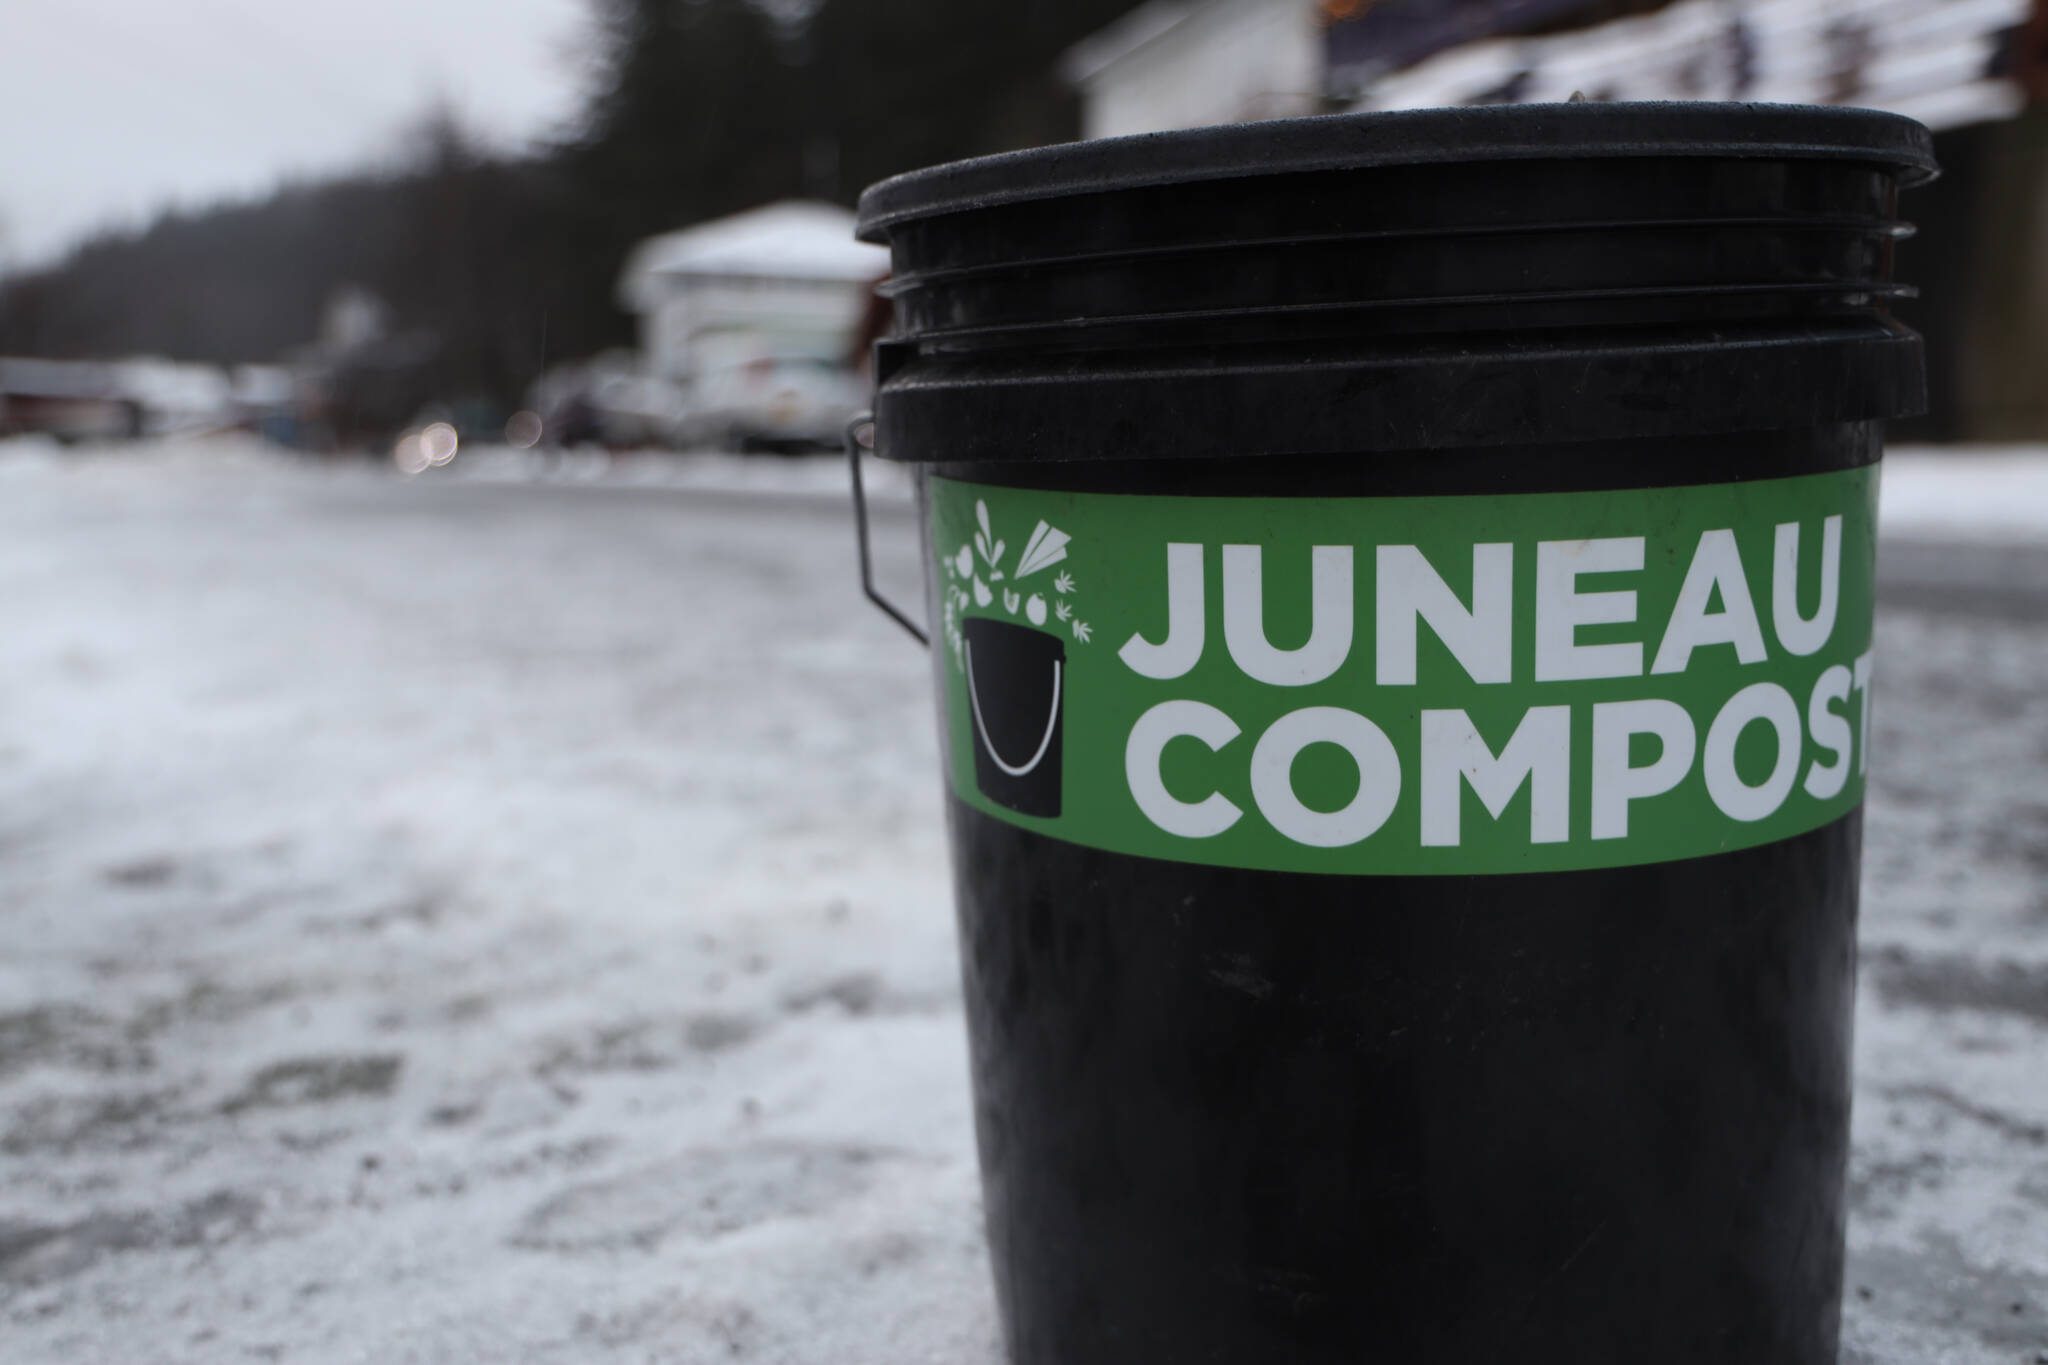 A bucket of compost awaits pickup by Juneau Composts on Douglas Tuesday morning. The City and Borough of Juneau was earmarked to be included in the $1.7 trillion spending bill which would allocate $2.5 million in funding toward designing and constructing a commercial-scale compost facility in Juneau. (Clarise Larson / Juneau Empire)